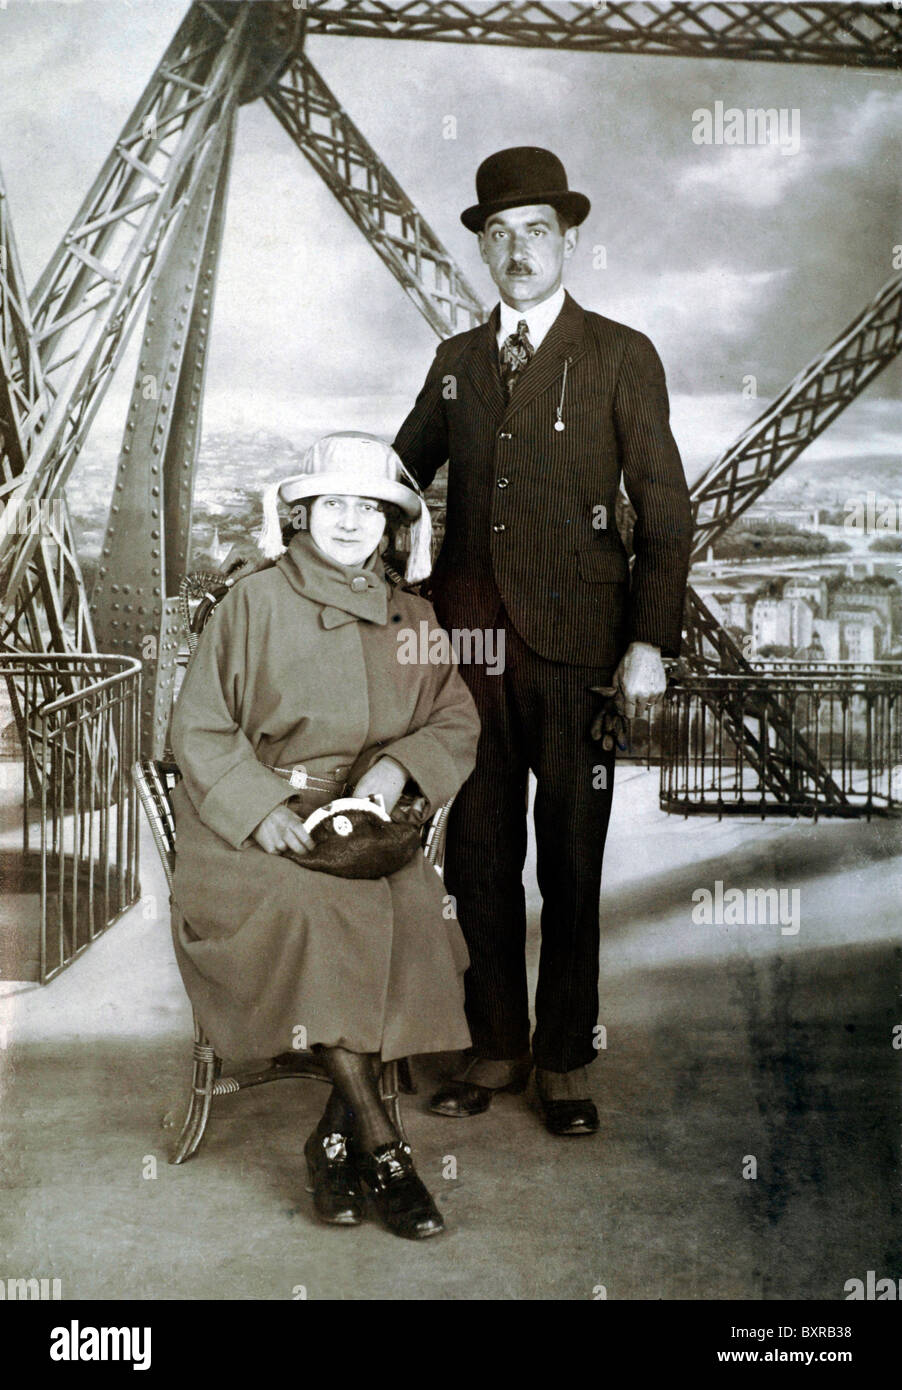 Tourists or Tourist Couple Photographed on or with the Eiffel Tower as a Painted Background or Studio Prop, Paris (c1920-30s)^France.  Formal Studio Souvenir Photograph Stock Photo